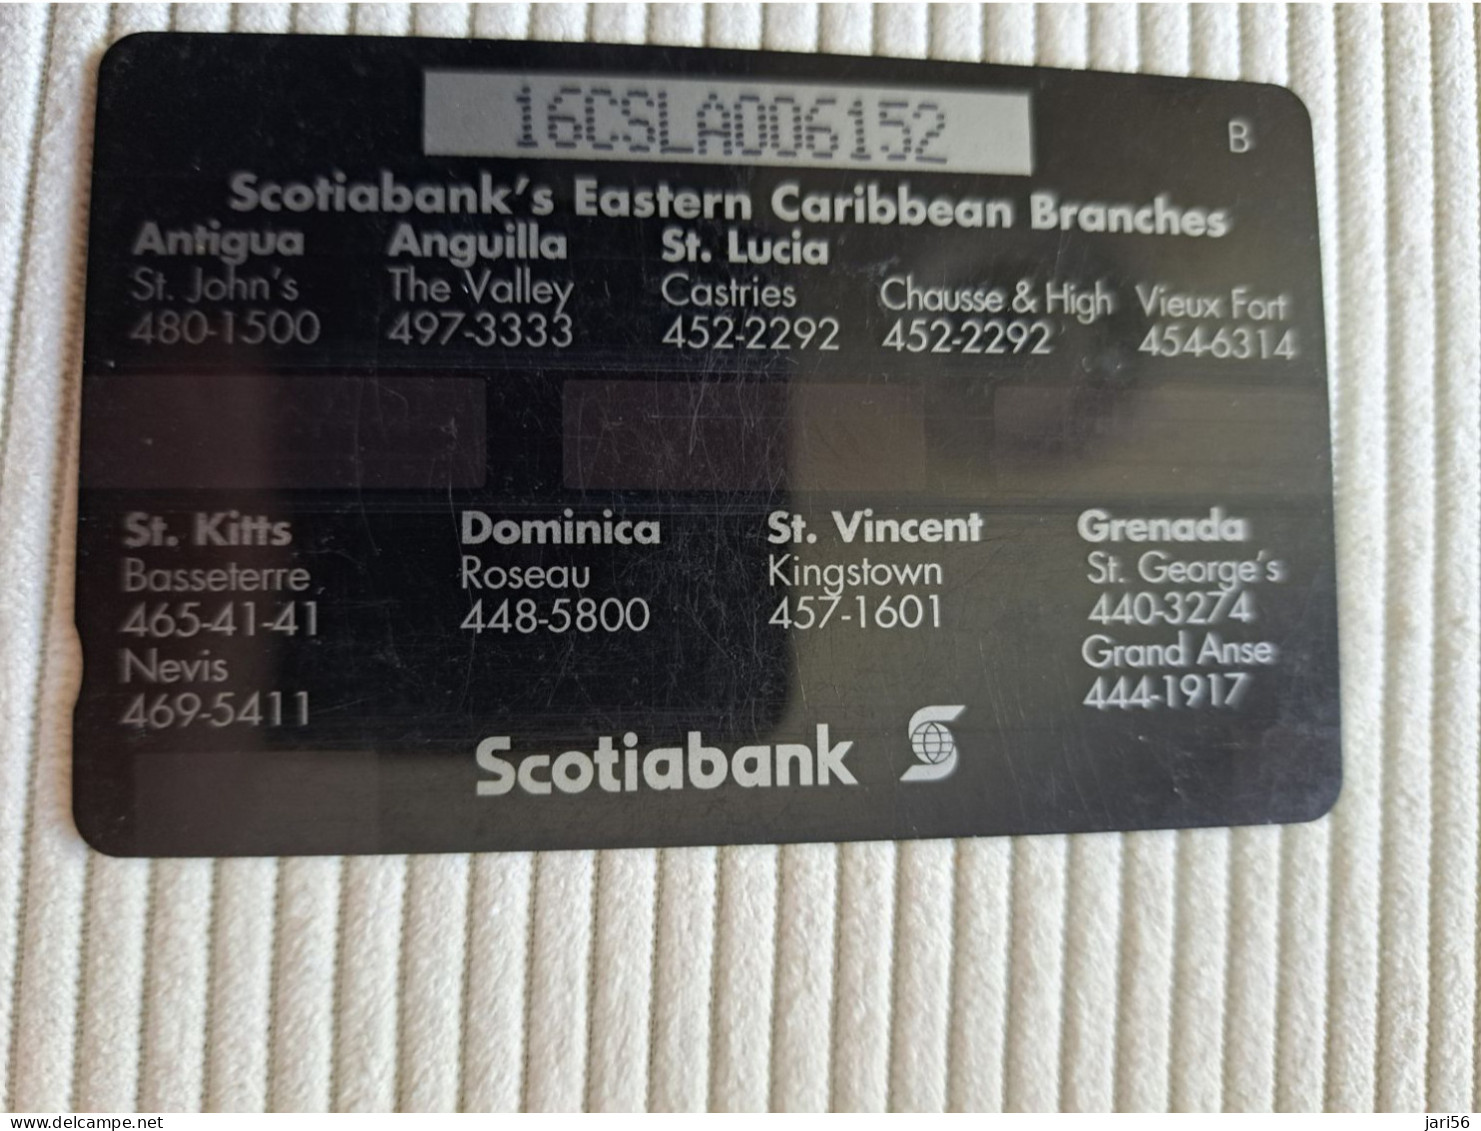 ST LUCIA    $ 20  CABLE & WIRELESS   SCOTIABANK    16CSLA   Fine Used Card ** 15742 ** - St. Lucia